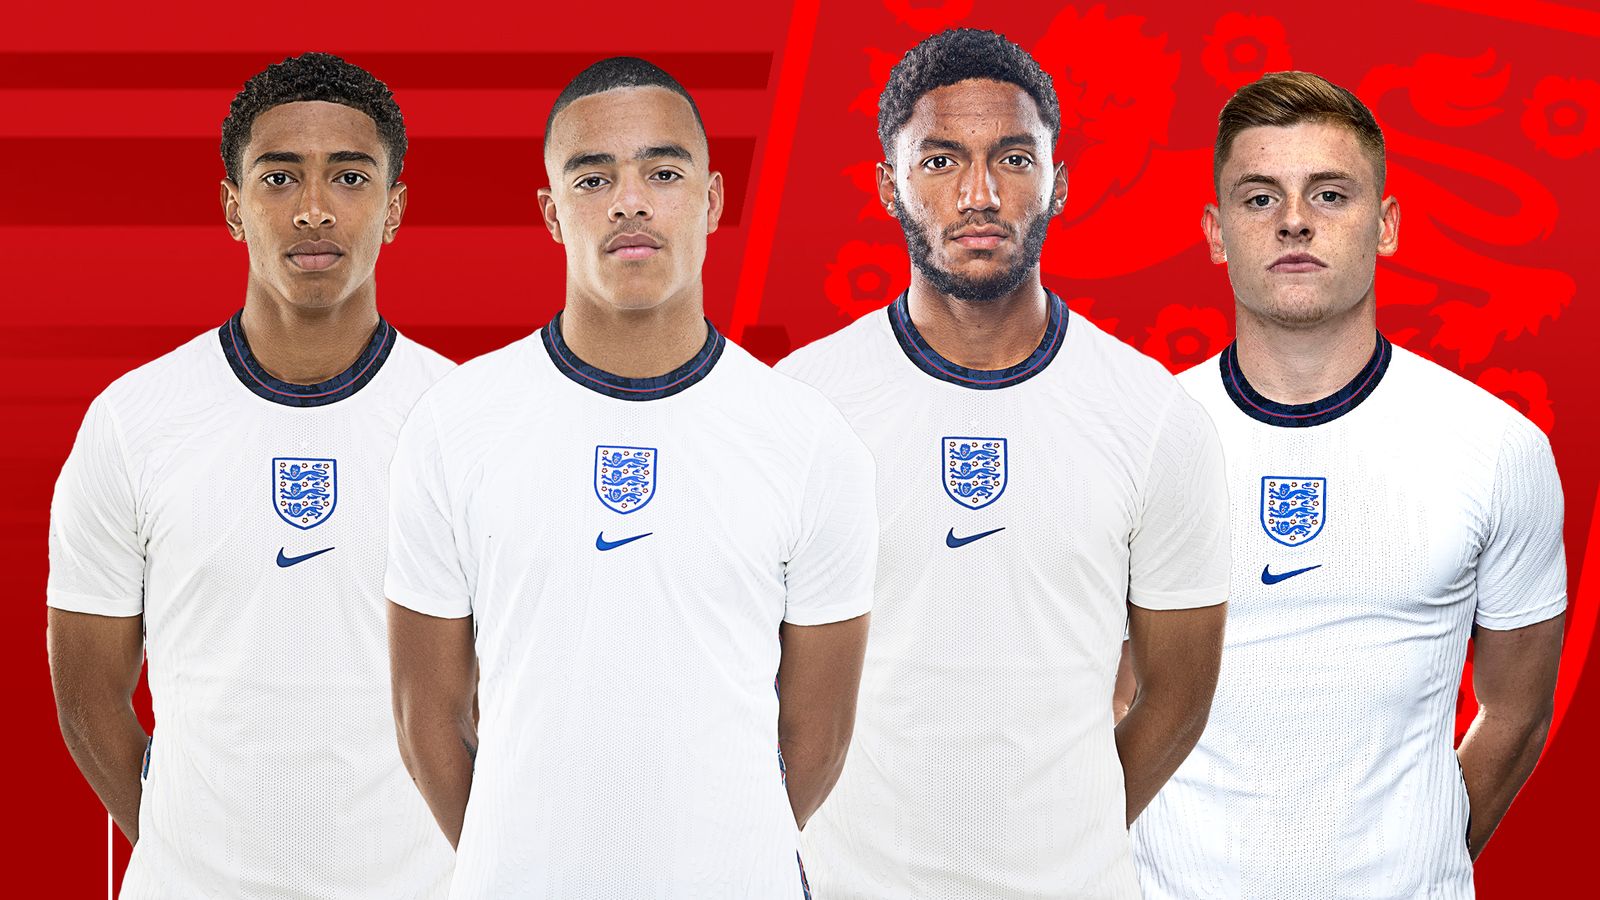 England's stars of the 2022 World Cup in Qatar Seven players who could